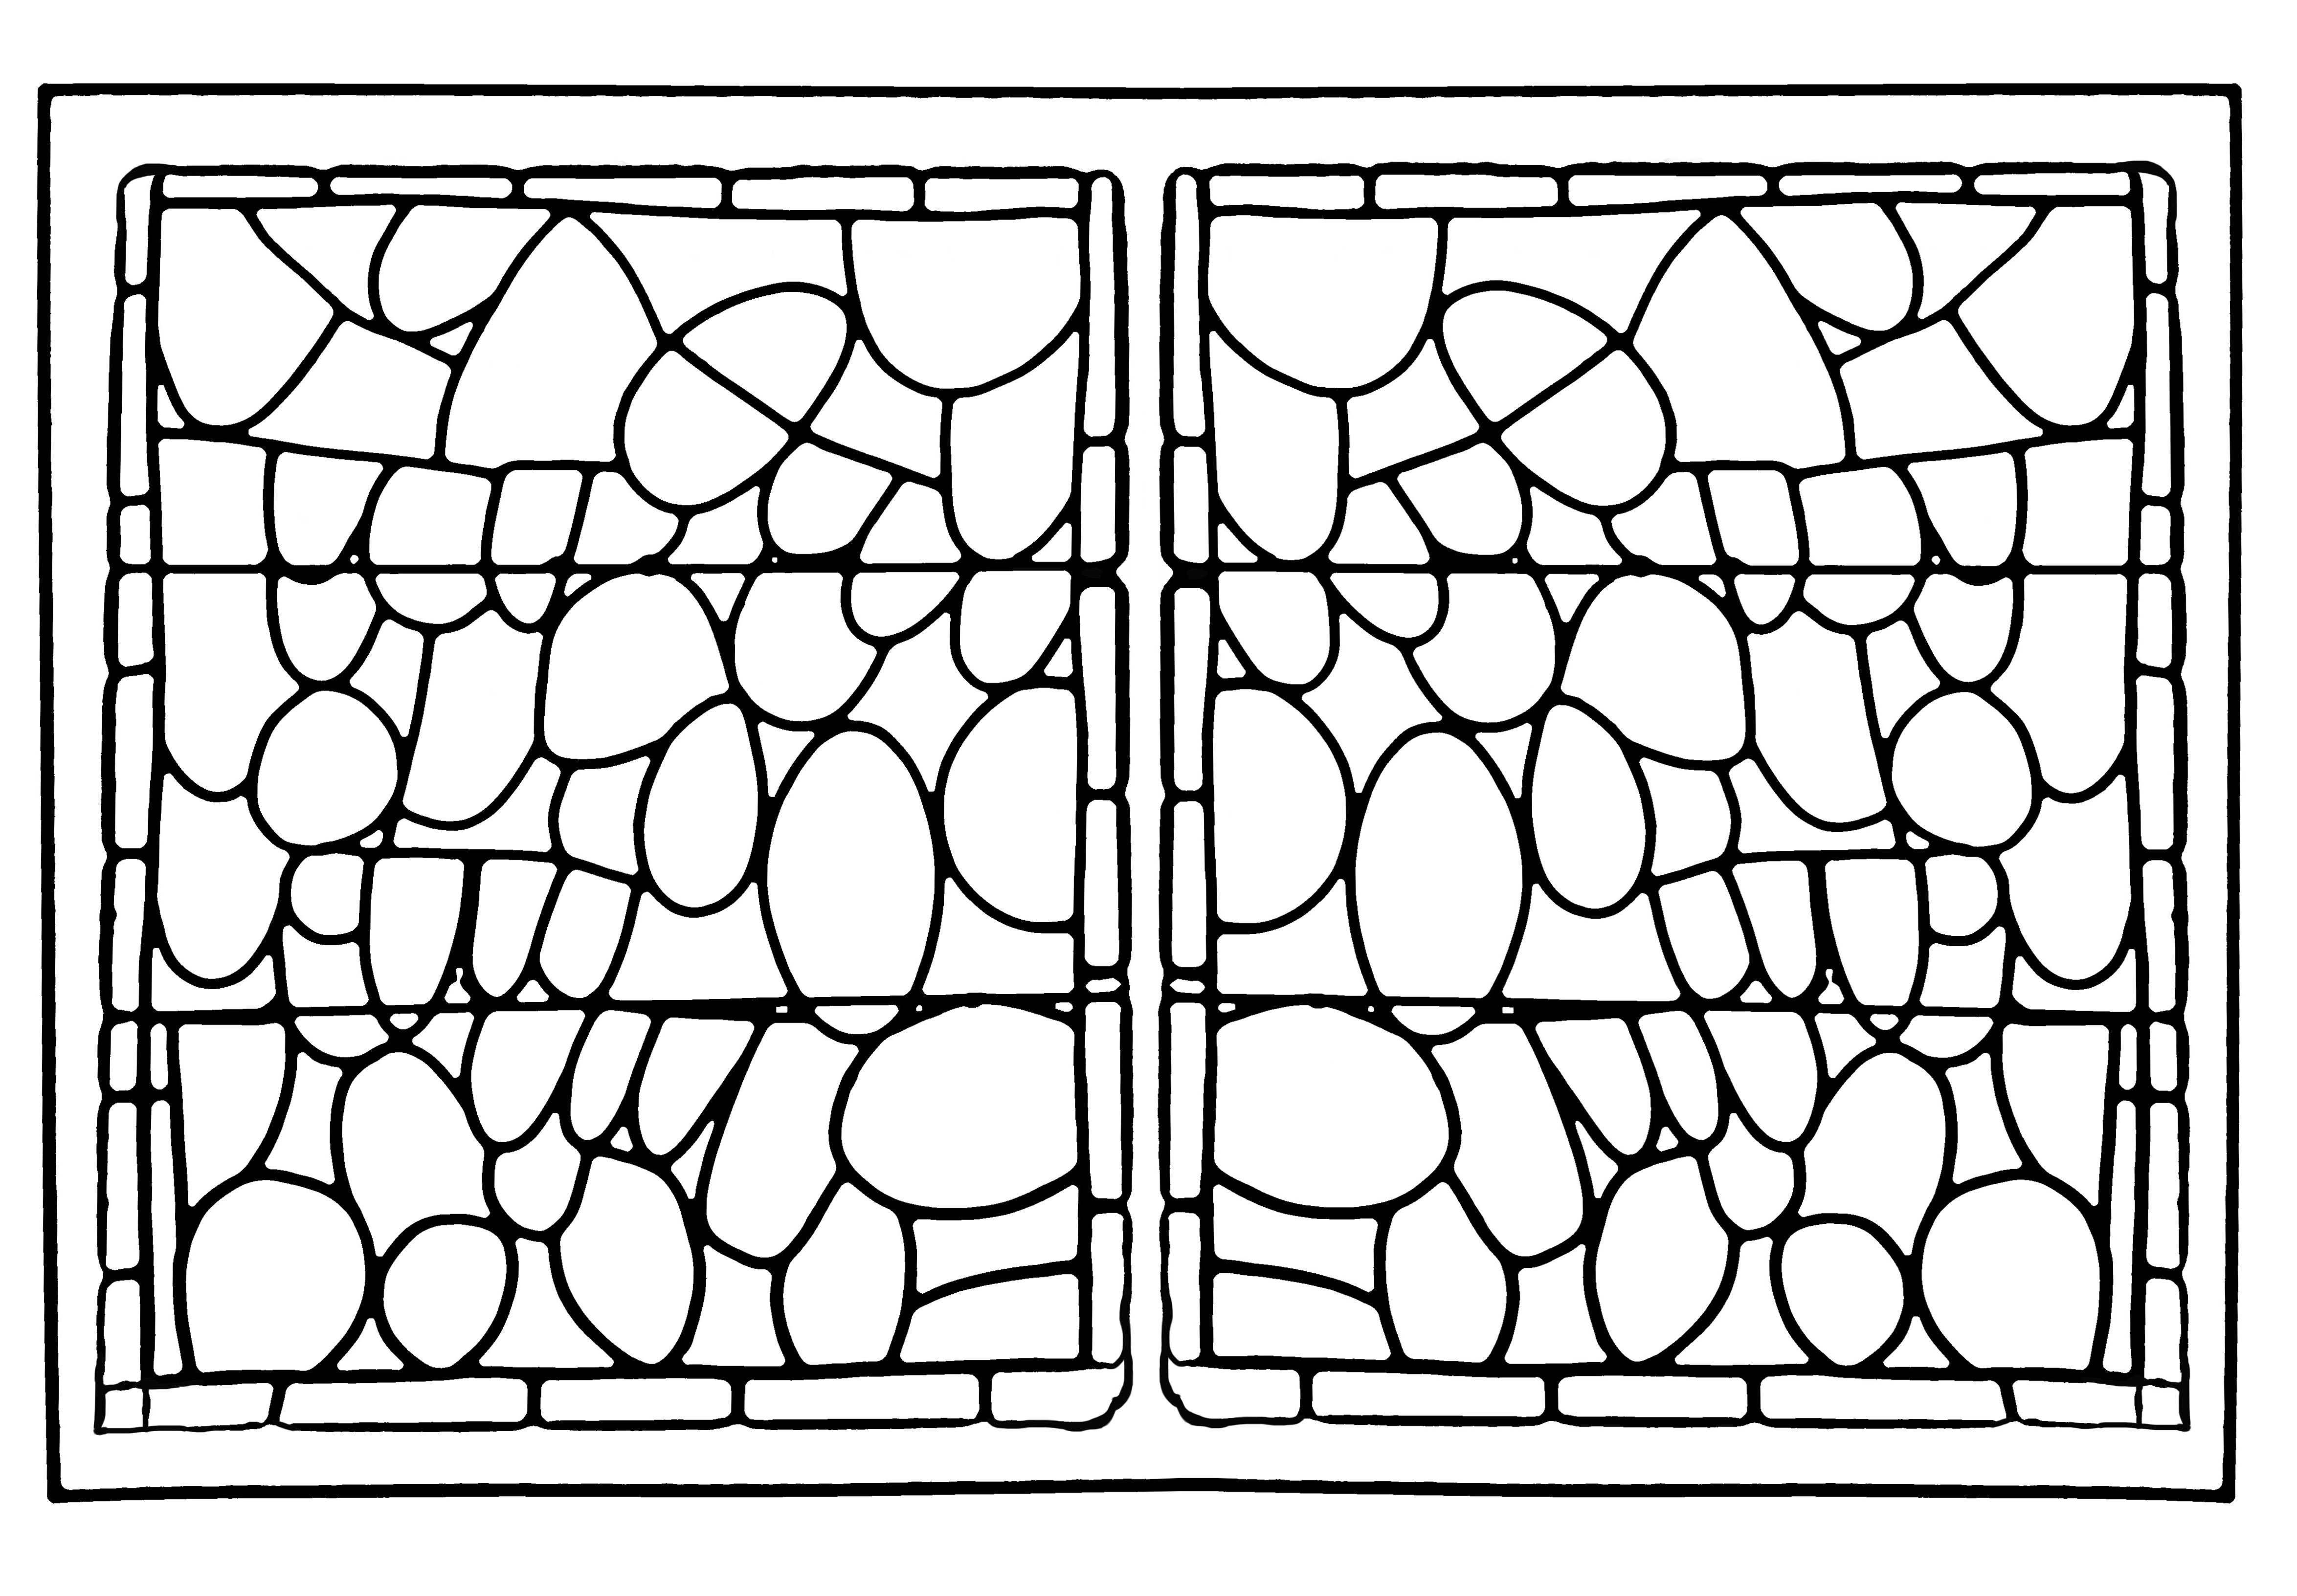 Coloring page made from a modern Stained glass : Chapel of Prieure de Bethleem, Nîmes, France - version 2